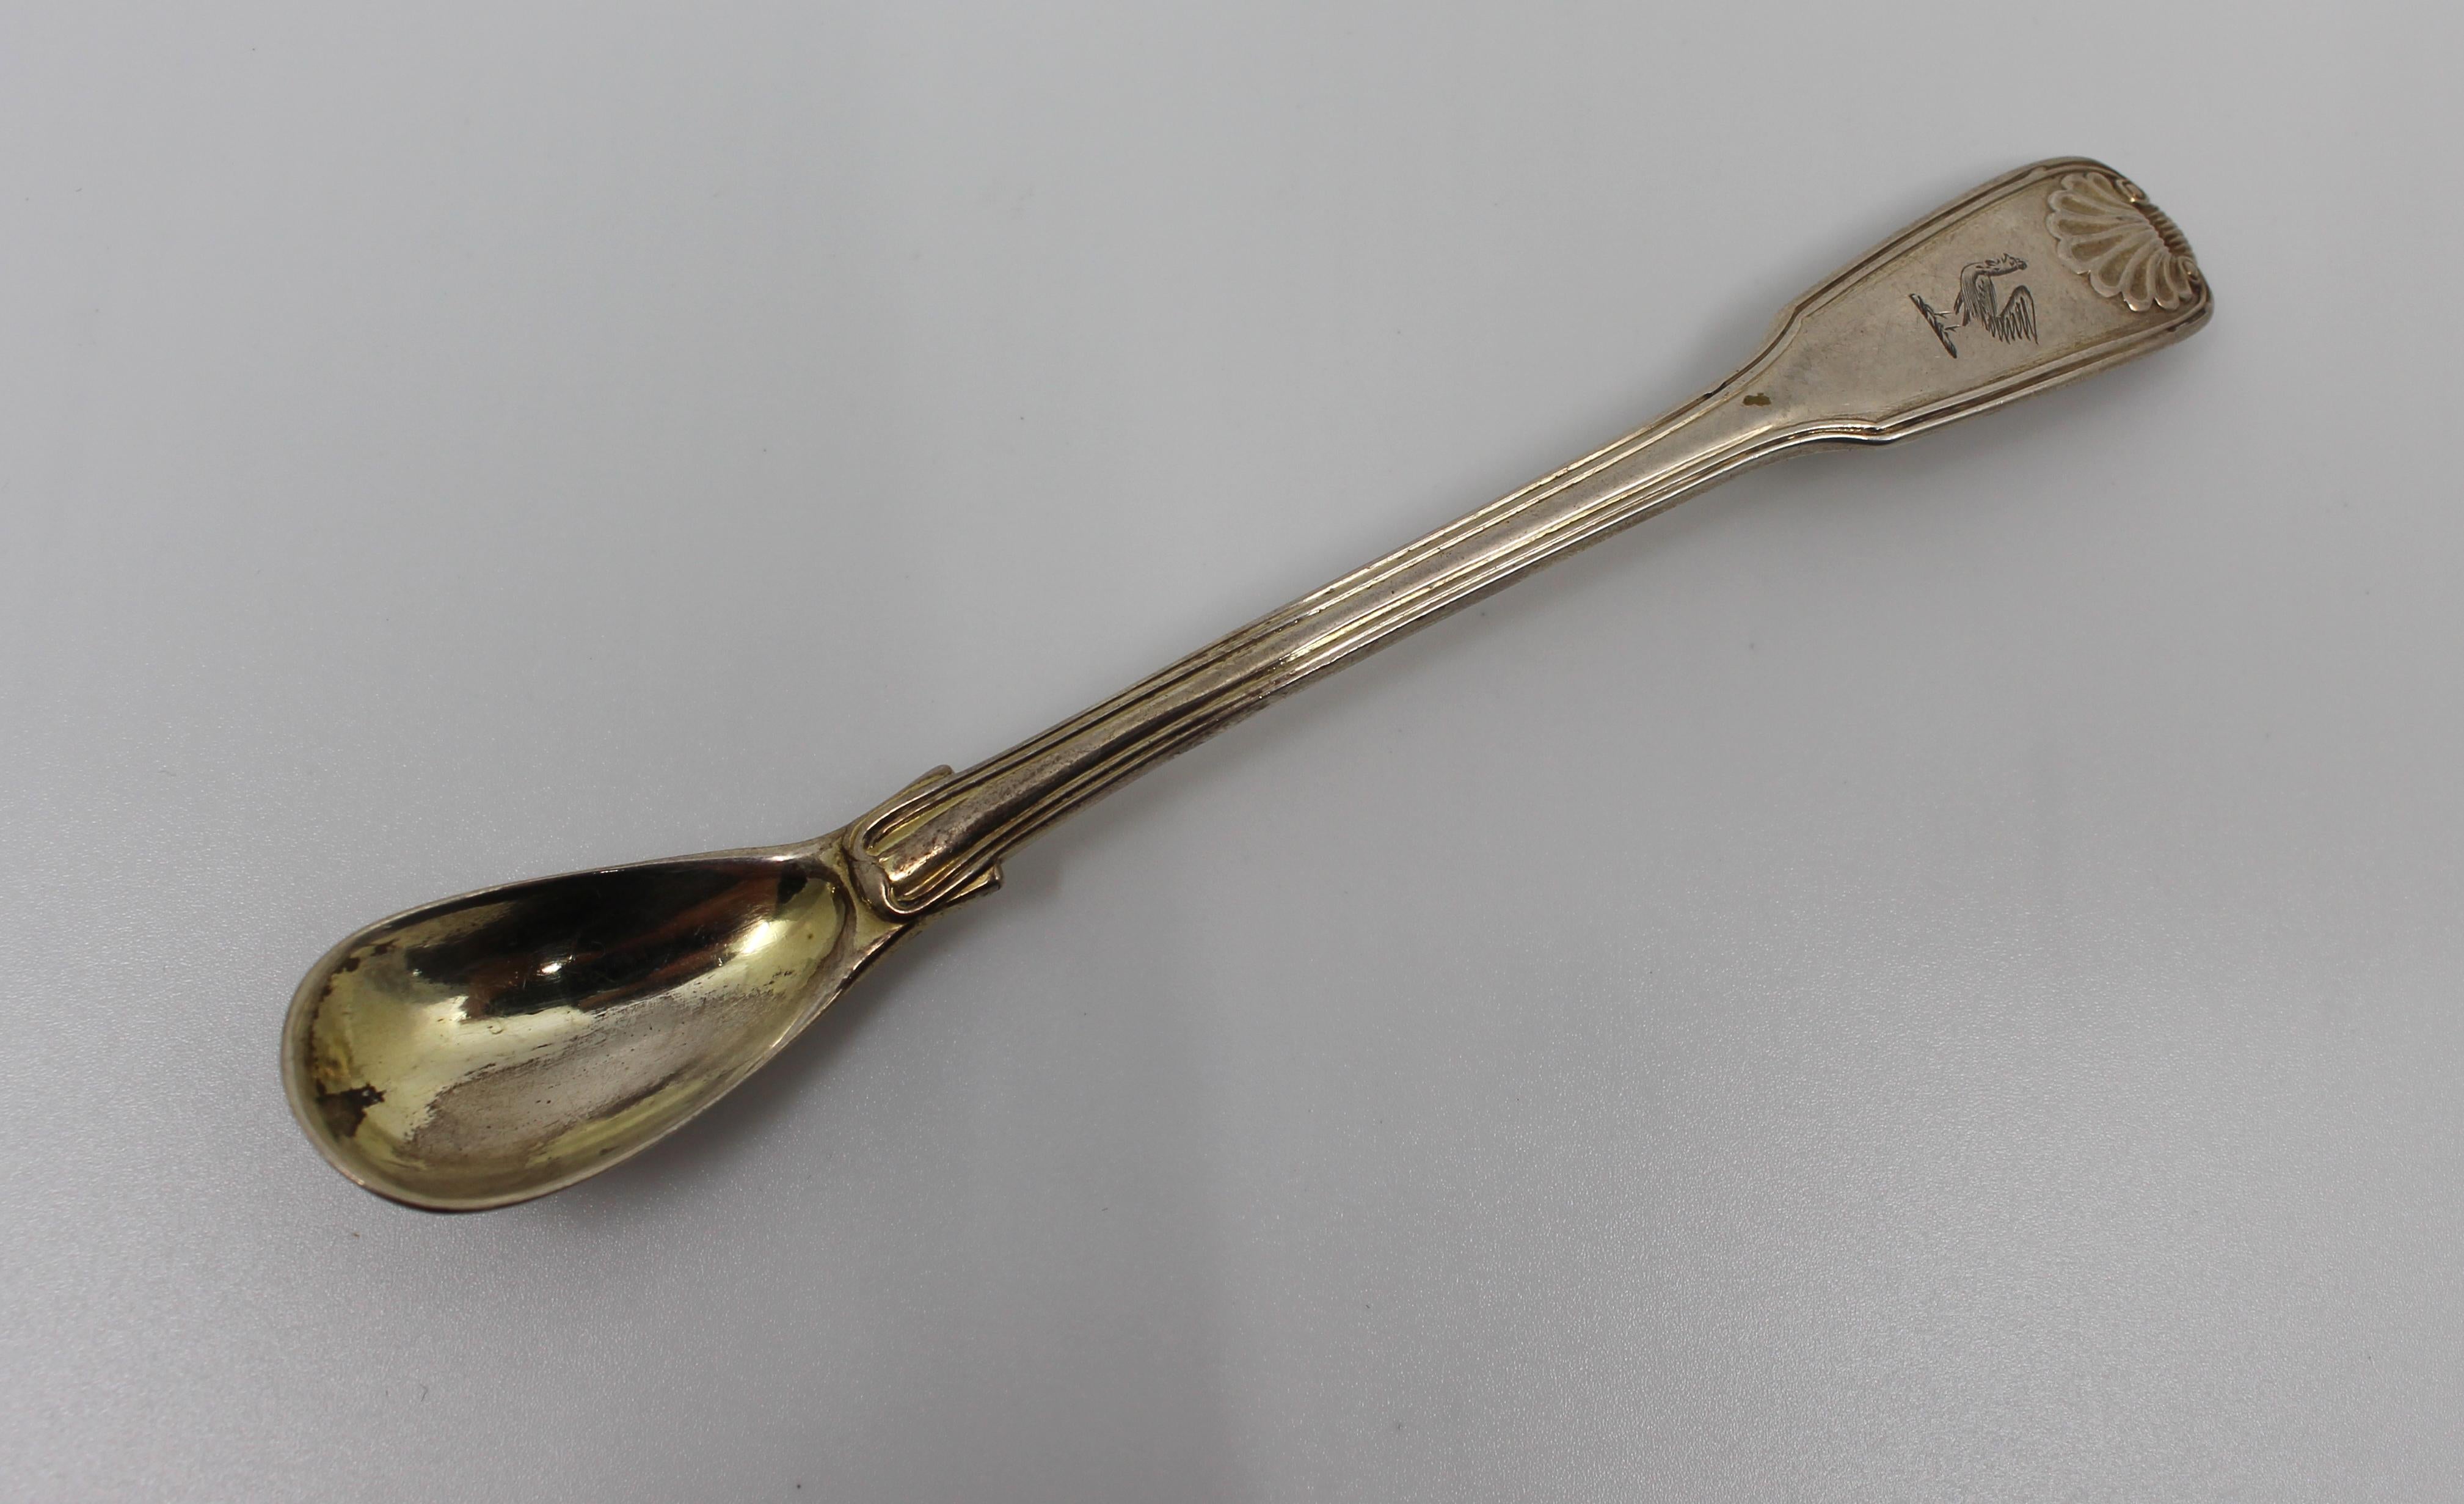 

 

Period George IV
Maker William Chawner II
Hallmark London, 1824
Length 14 cm / 5 1/2 in
Weight 31 g
Condition 
Very good condition commensurate with age, originally gilded

 

 

Lovely quality solid silver mustard